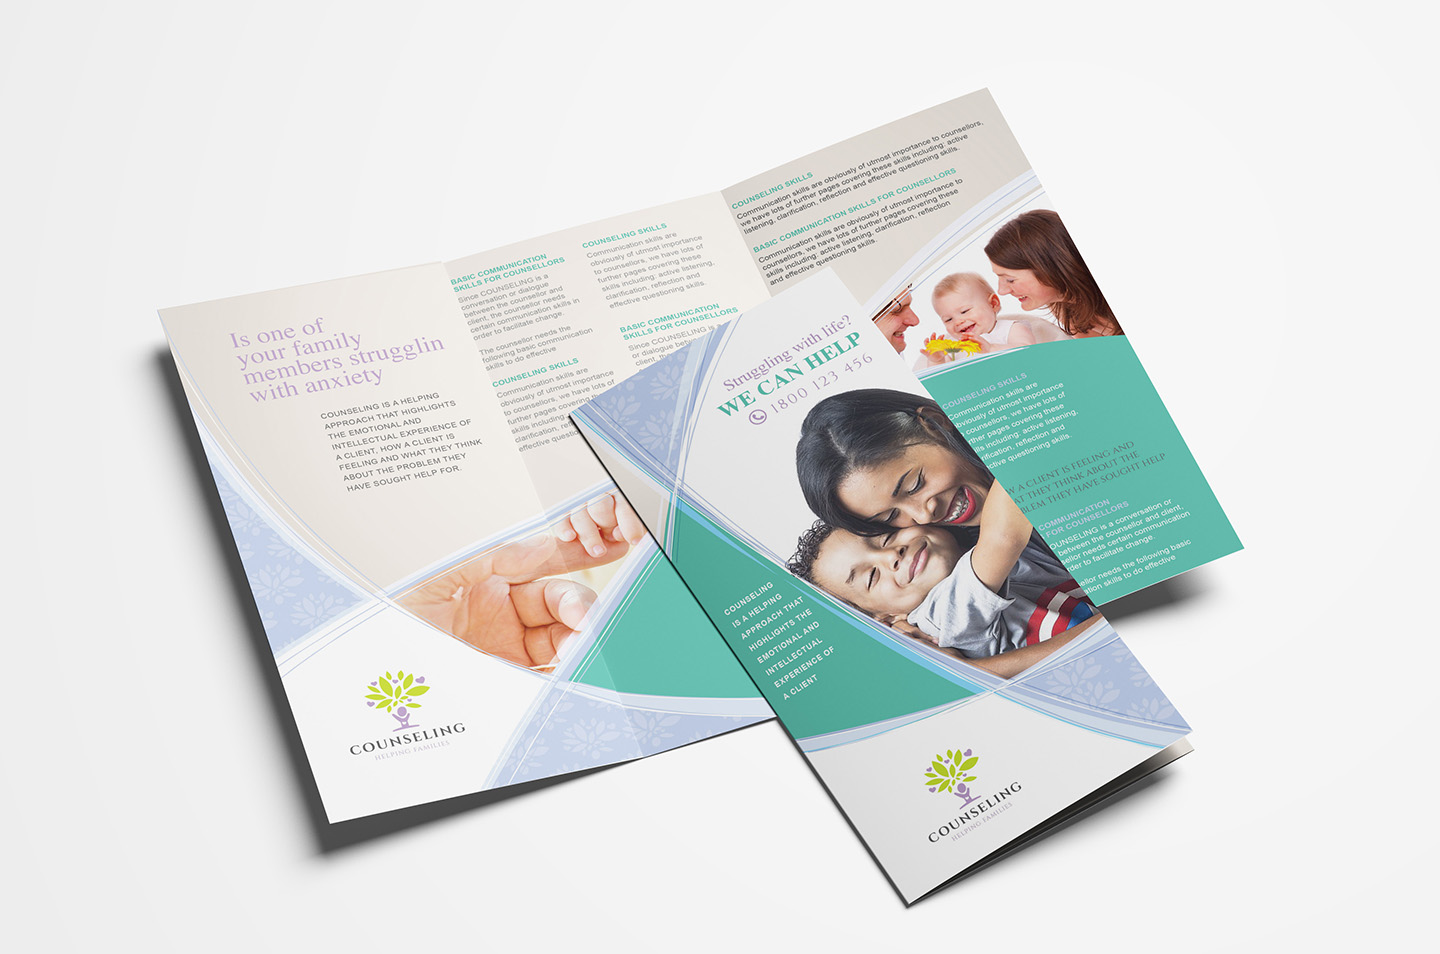 Counselling Service Trifold Brochure Template